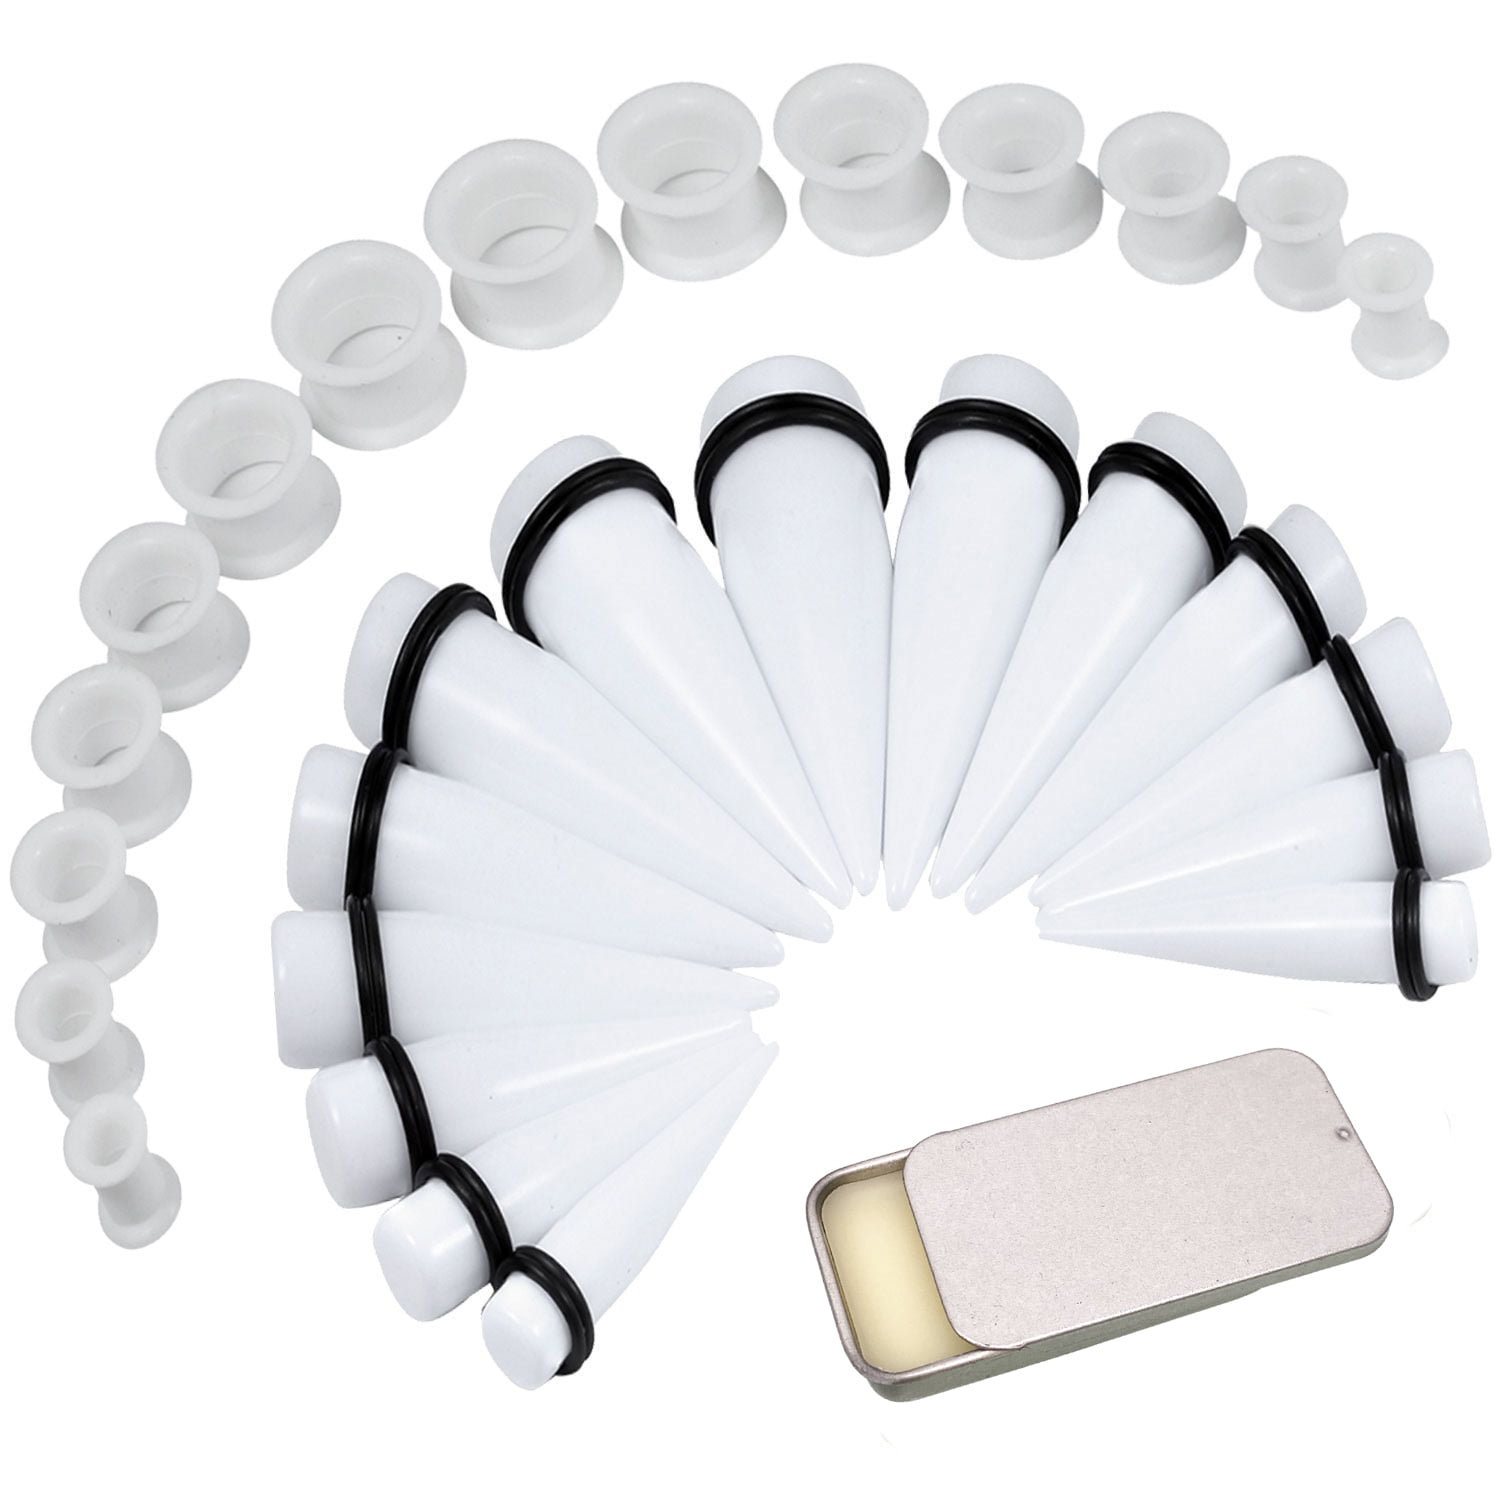 BodyJ4You 37PC Gauges Kit Ear Stretching Aftercare Balm 00G-20mm White Silicone Tunnel Plug Acrylic Taper